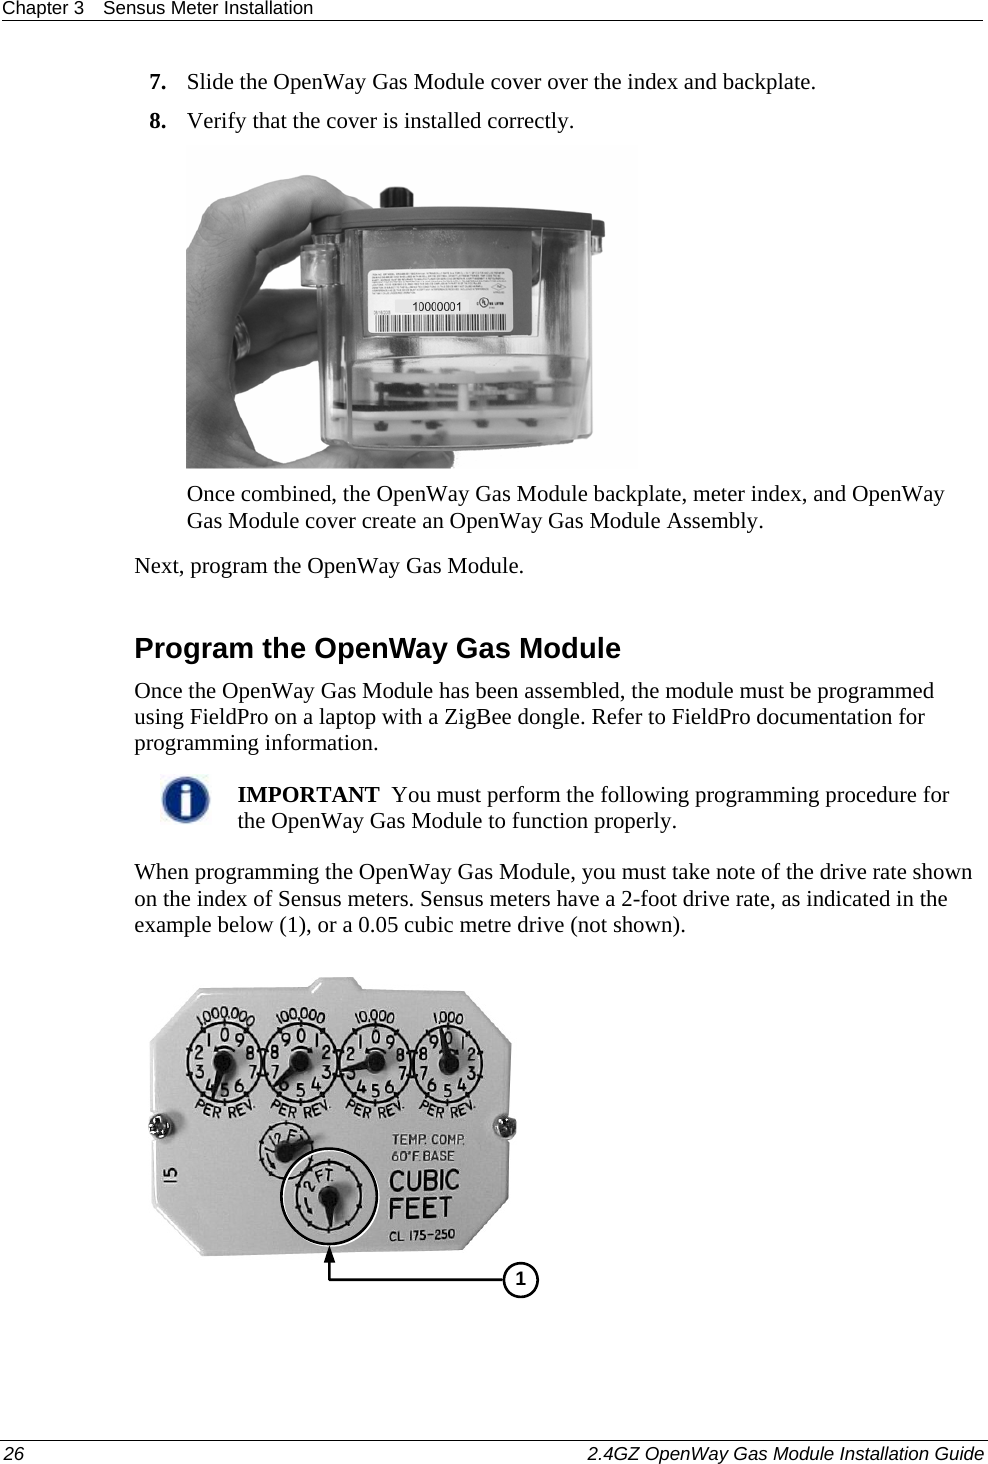 Chapter 3  Sensus Meter Installation  26    2.4GZ OpenWay Gas Module Installation Guide  7. Slide the OpenWay Gas Module cover over the index and backplate.  8. Verify that the cover is installed correctly.   Once combined, the OpenWay Gas Module backplate, meter index, and OpenWay Gas Module cover create an OpenWay Gas Module Assembly. Next, program the OpenWay Gas Module.  Program the OpenWay Gas Module Once the OpenWay Gas Module has been assembled, the module must be programmed using FieldPro on a laptop with a ZigBee dongle. Refer to FieldPro documentation for programming information.    IMPORTANT  You must perform the following programming procedure for the OpenWay Gas Module to function properly.  When programming the OpenWay Gas Module, you must take note of the drive rate shown on the index of Sensus meters. Sensus meters have a 2-foot drive rate, as indicated in the example below (1), or a 0.05 cubic metre drive (not shown).   1 